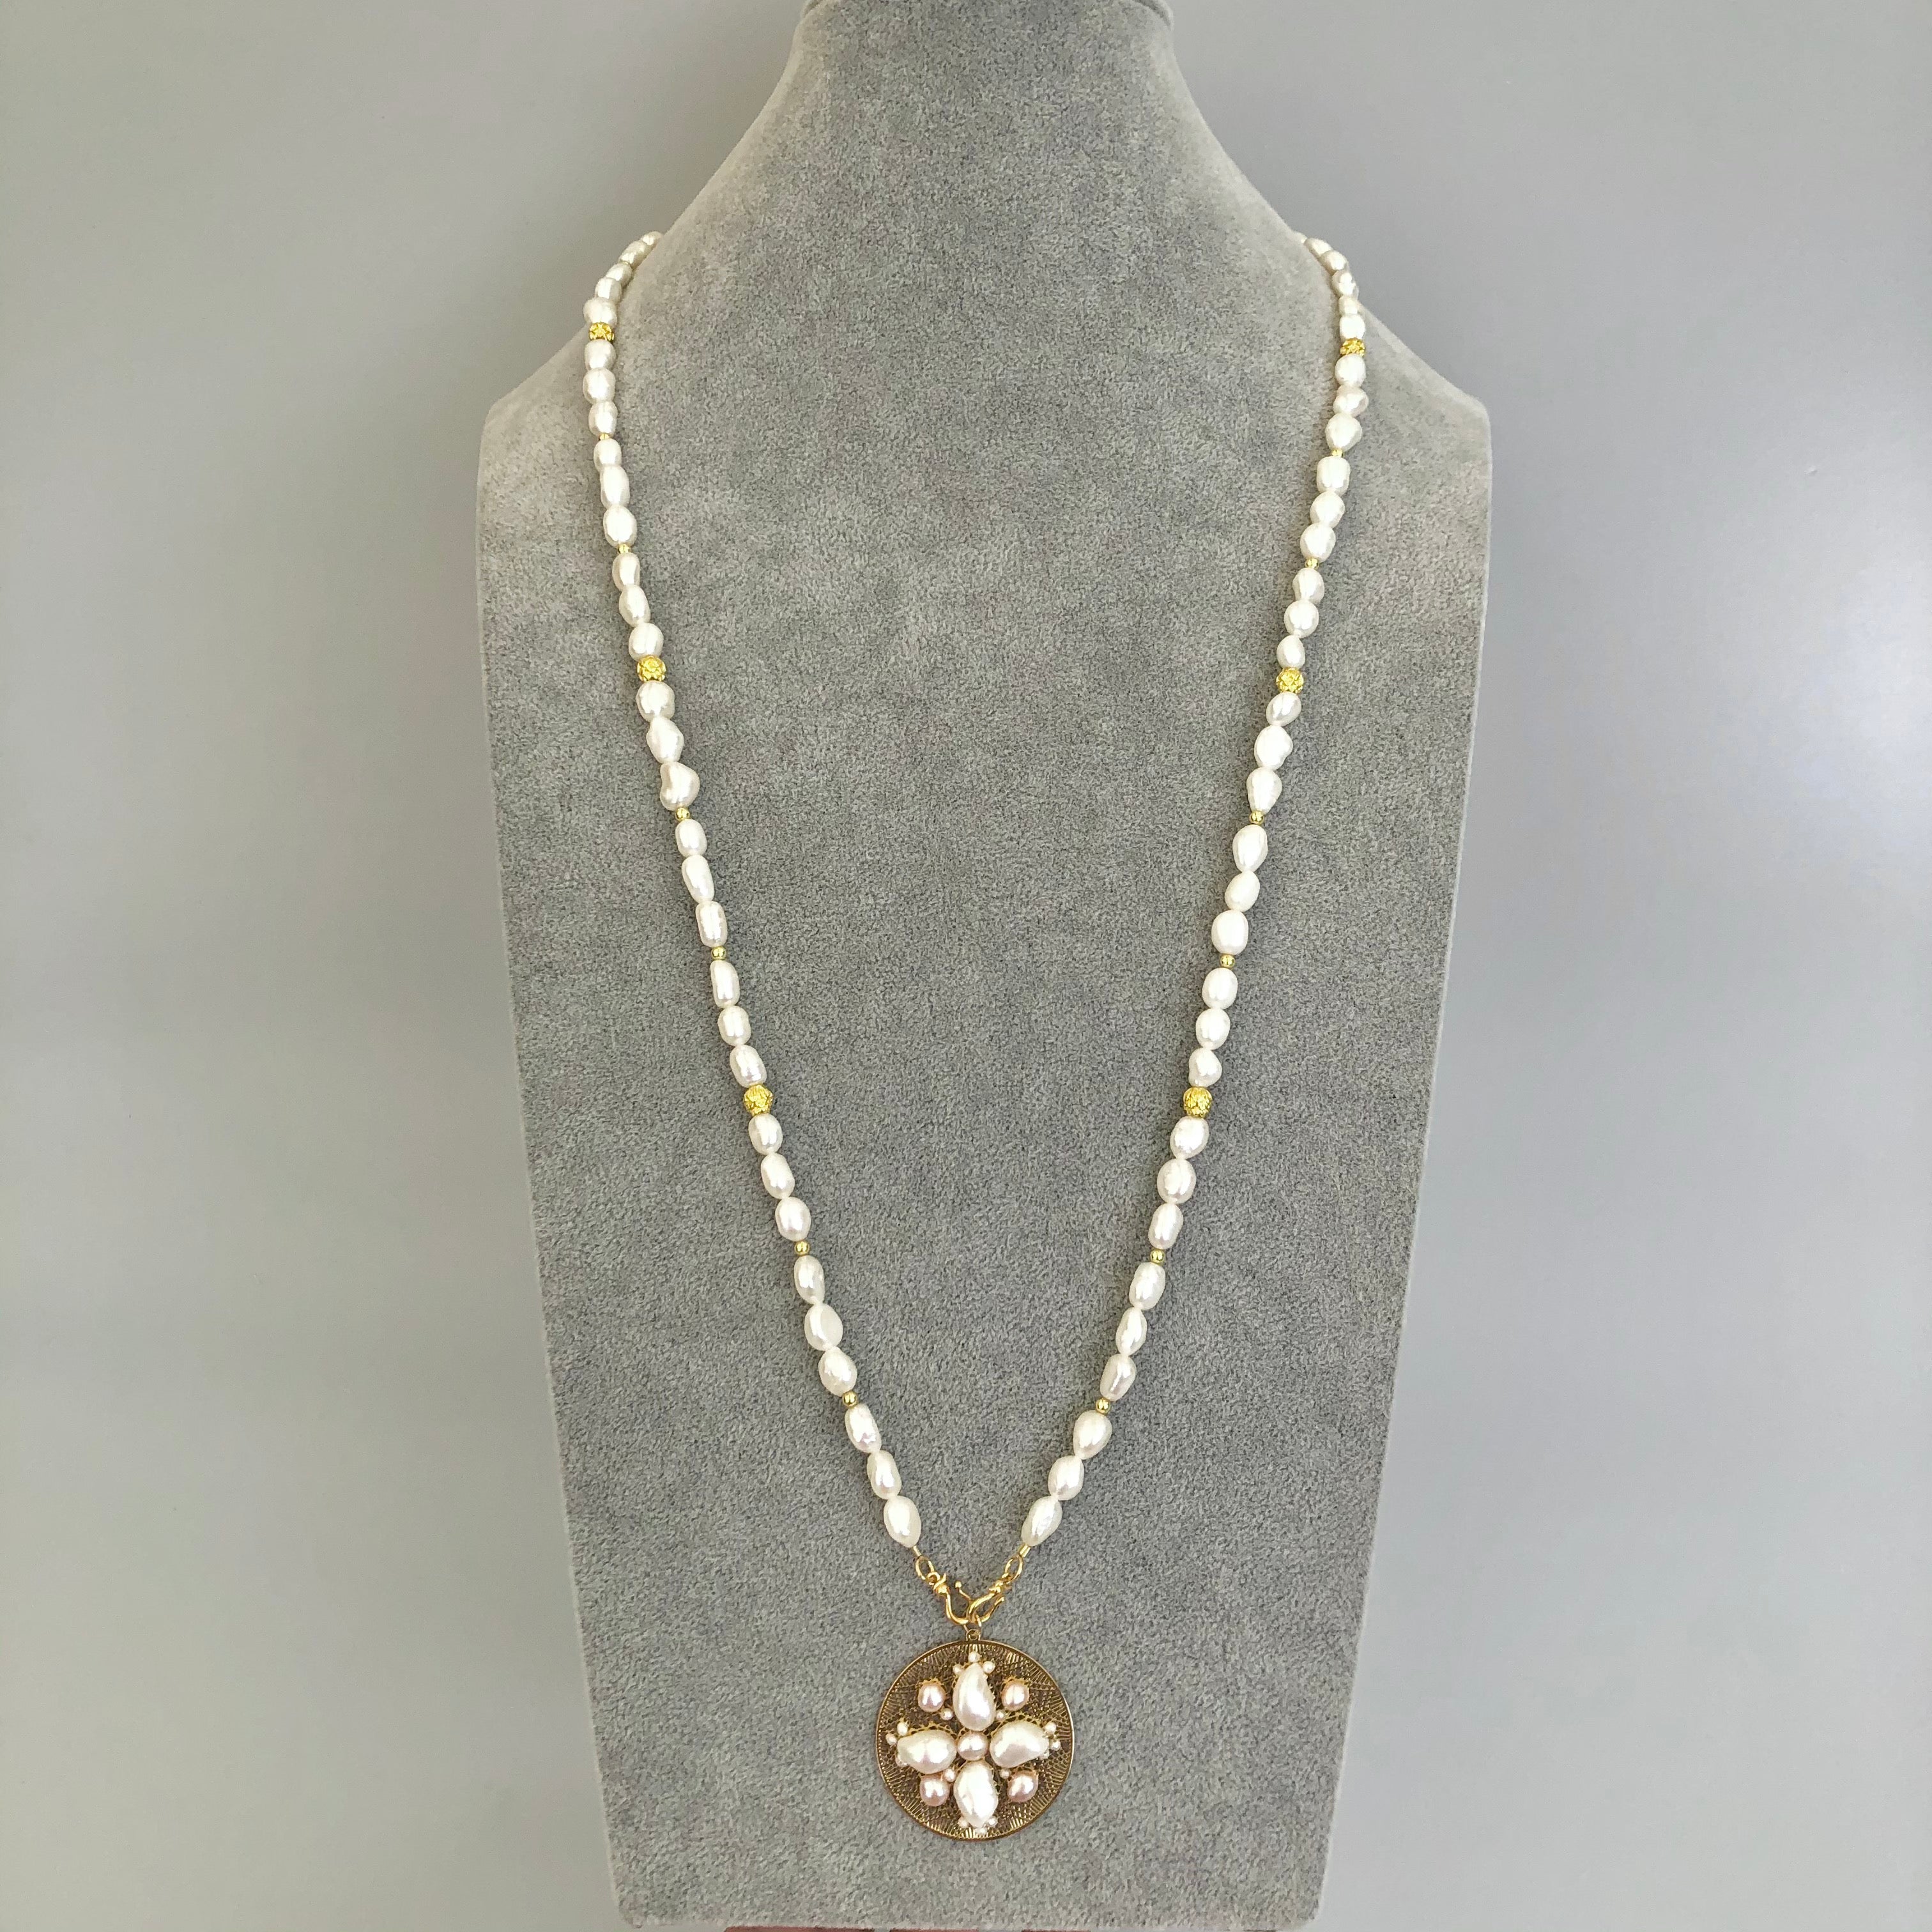 Vintage Chanel Baroque Pearl and Chunky Chain Necklace 1980s For